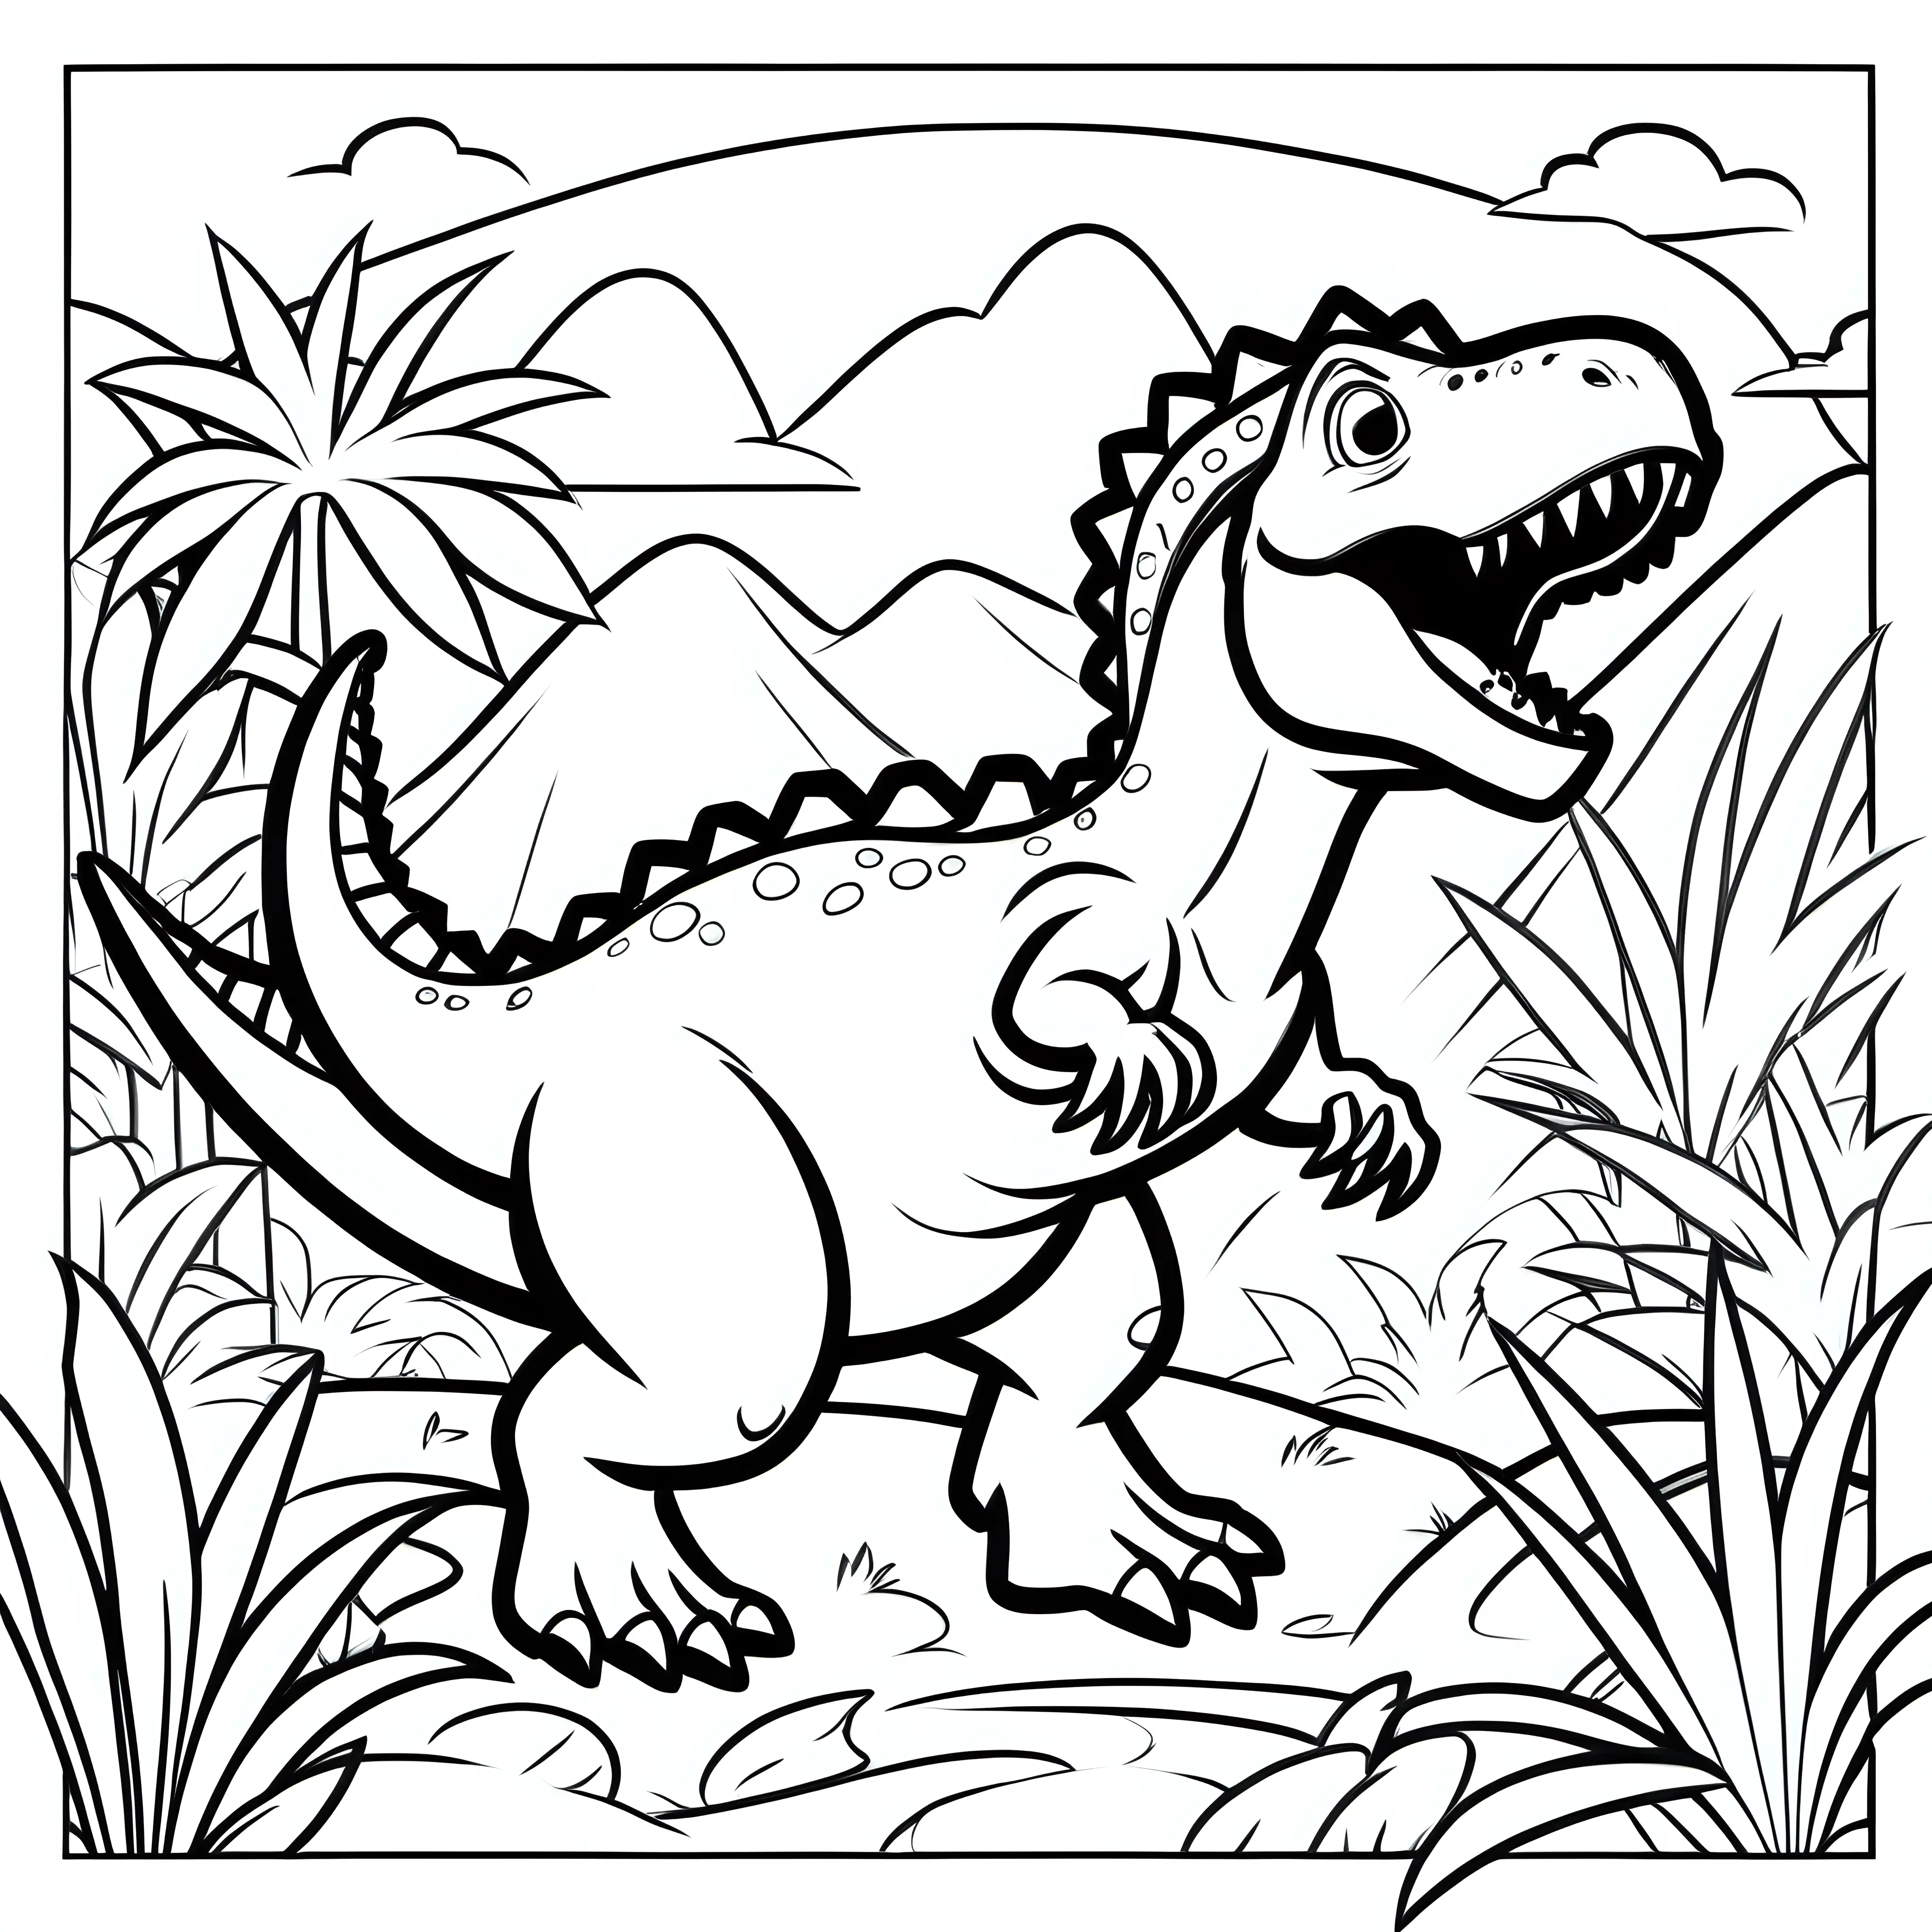 Childrens Dinosaur Fight Coloring Book Page